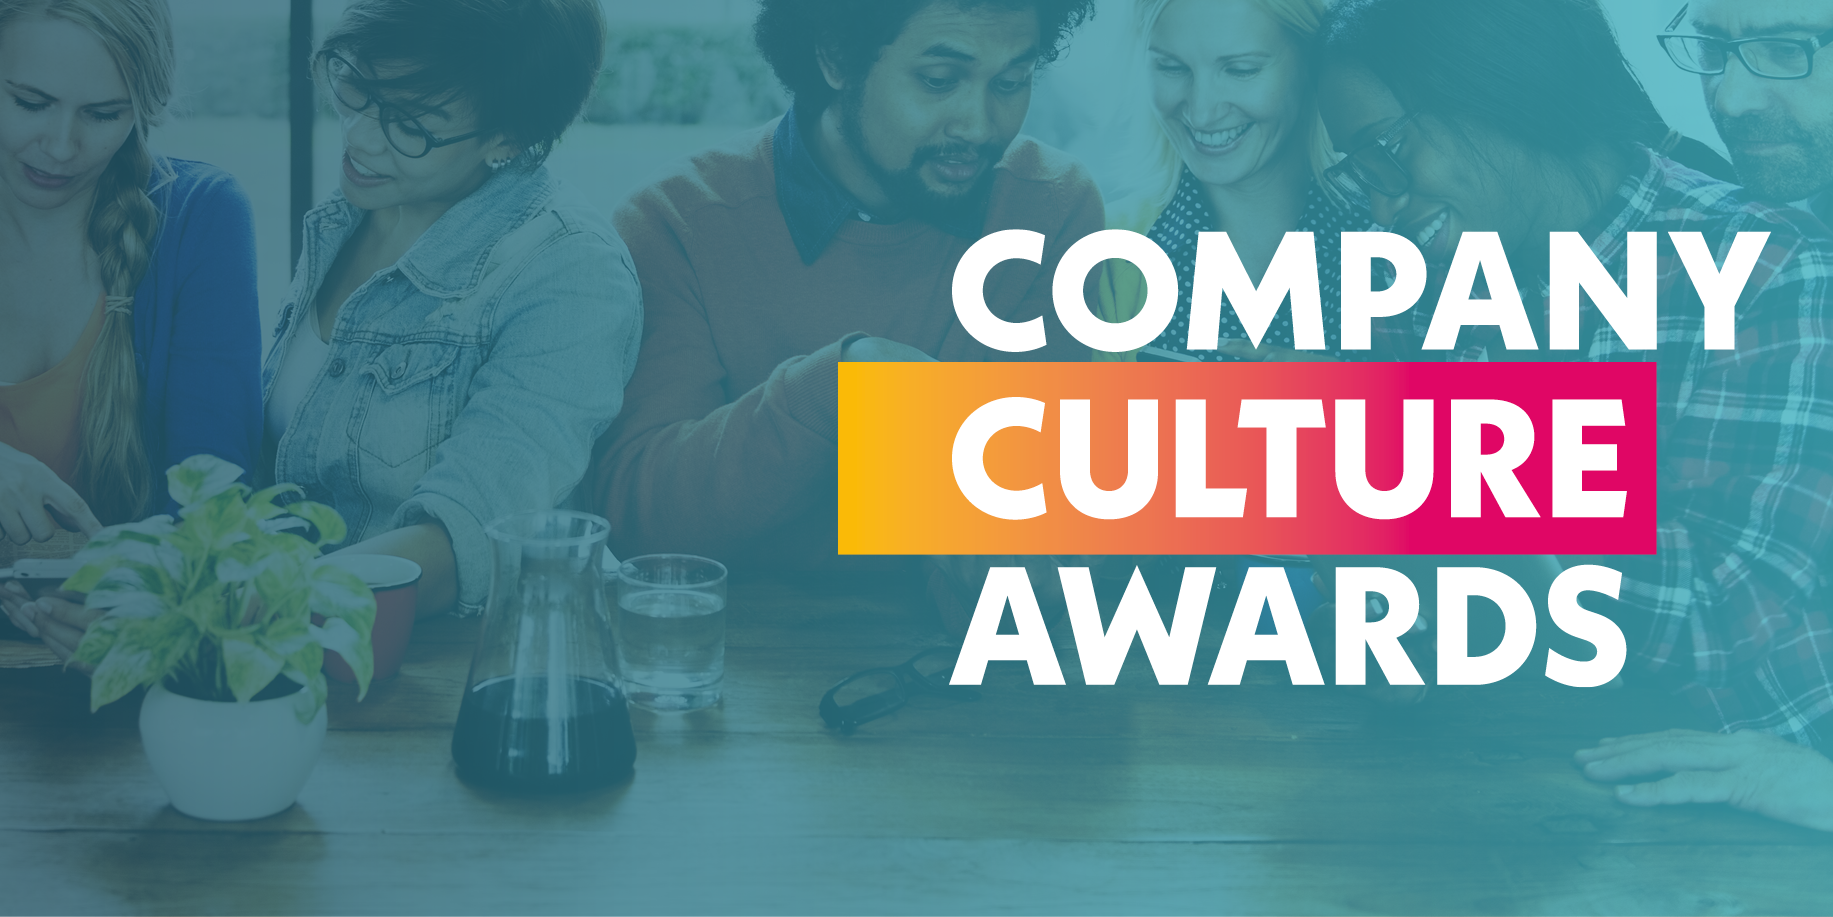 Awards that reward, recognise and celebrate Company Culture.